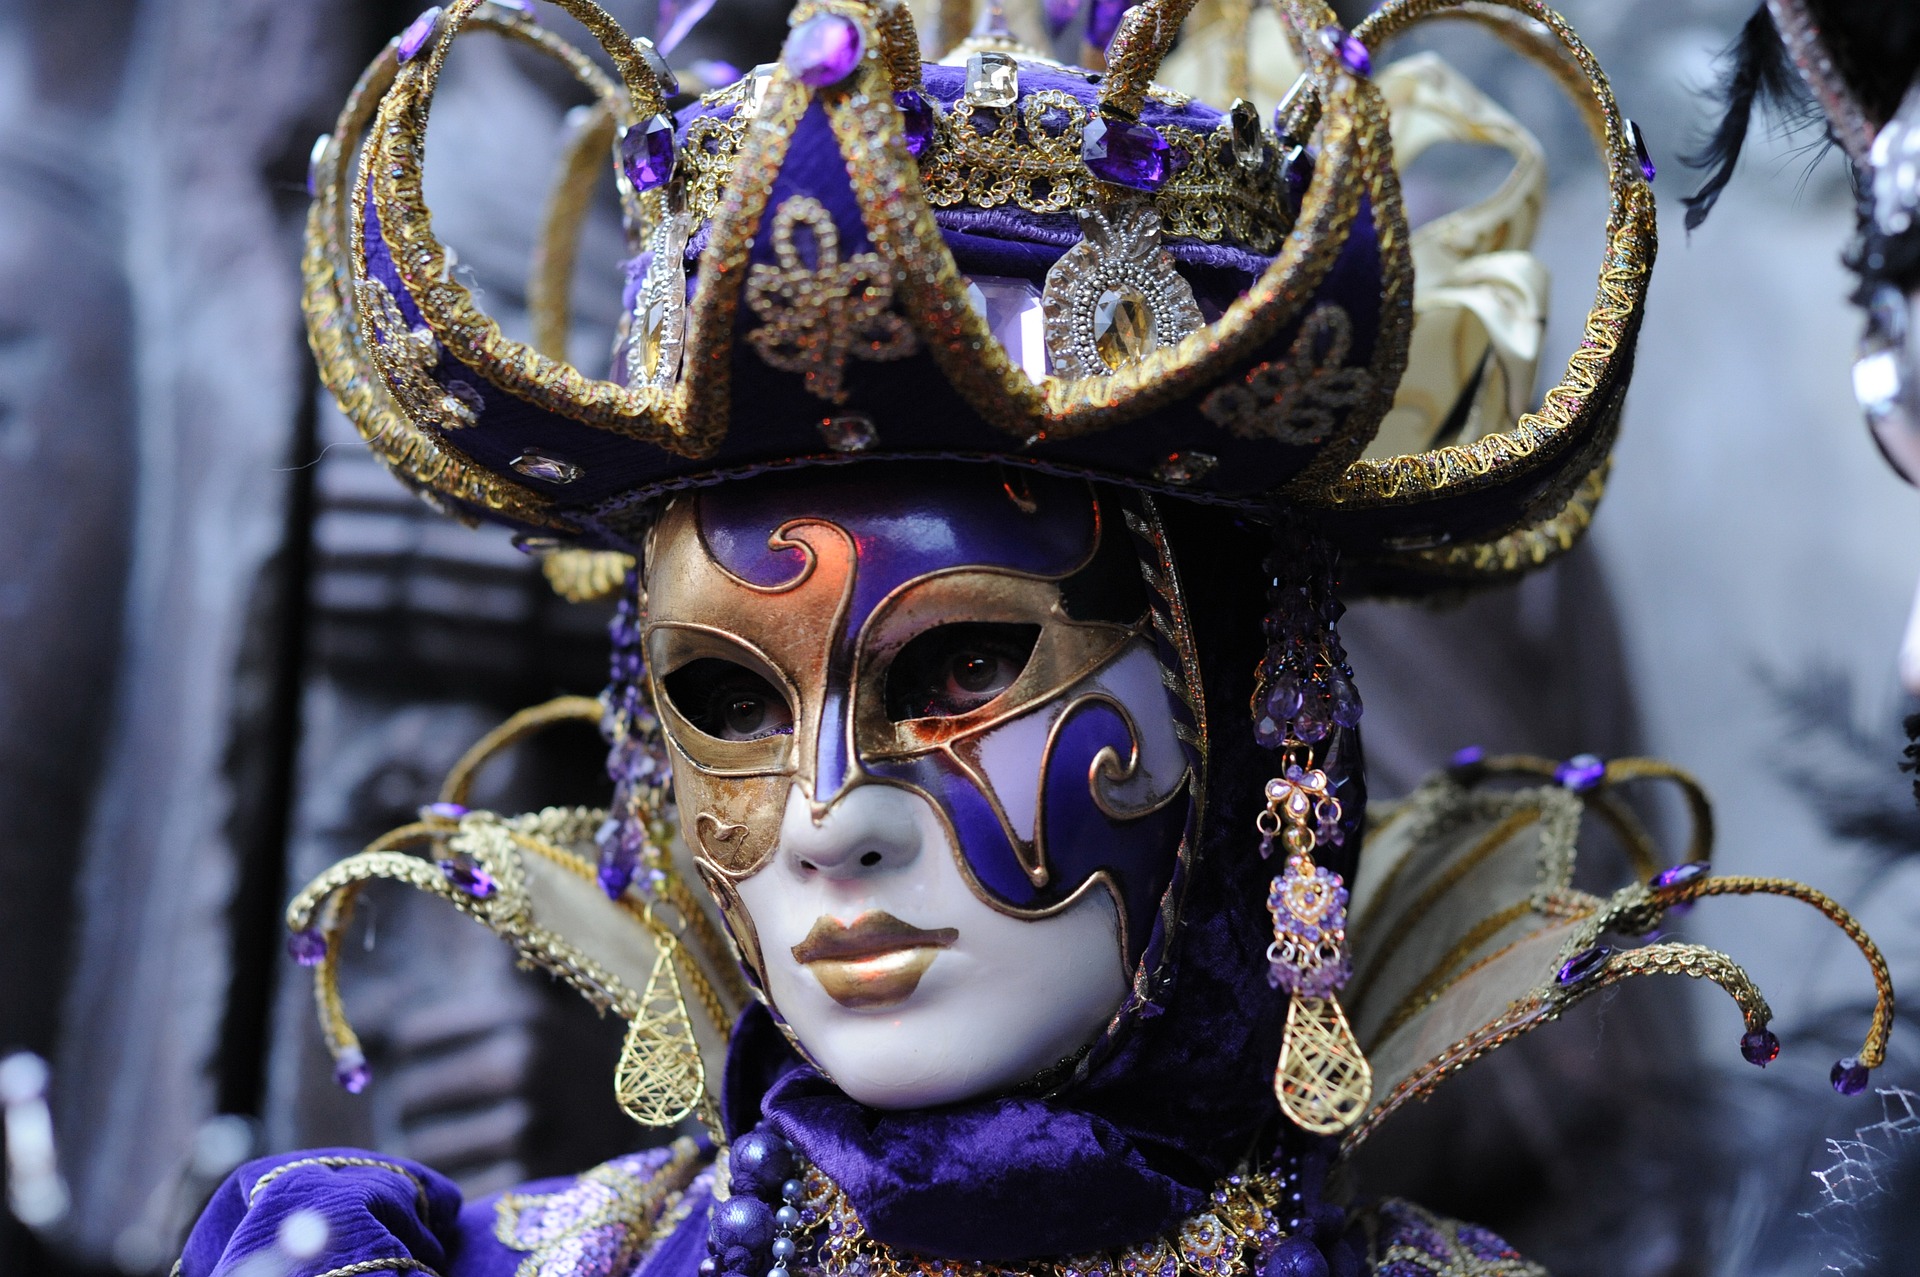 Why Are Masks Worn at Carnival in Spain?